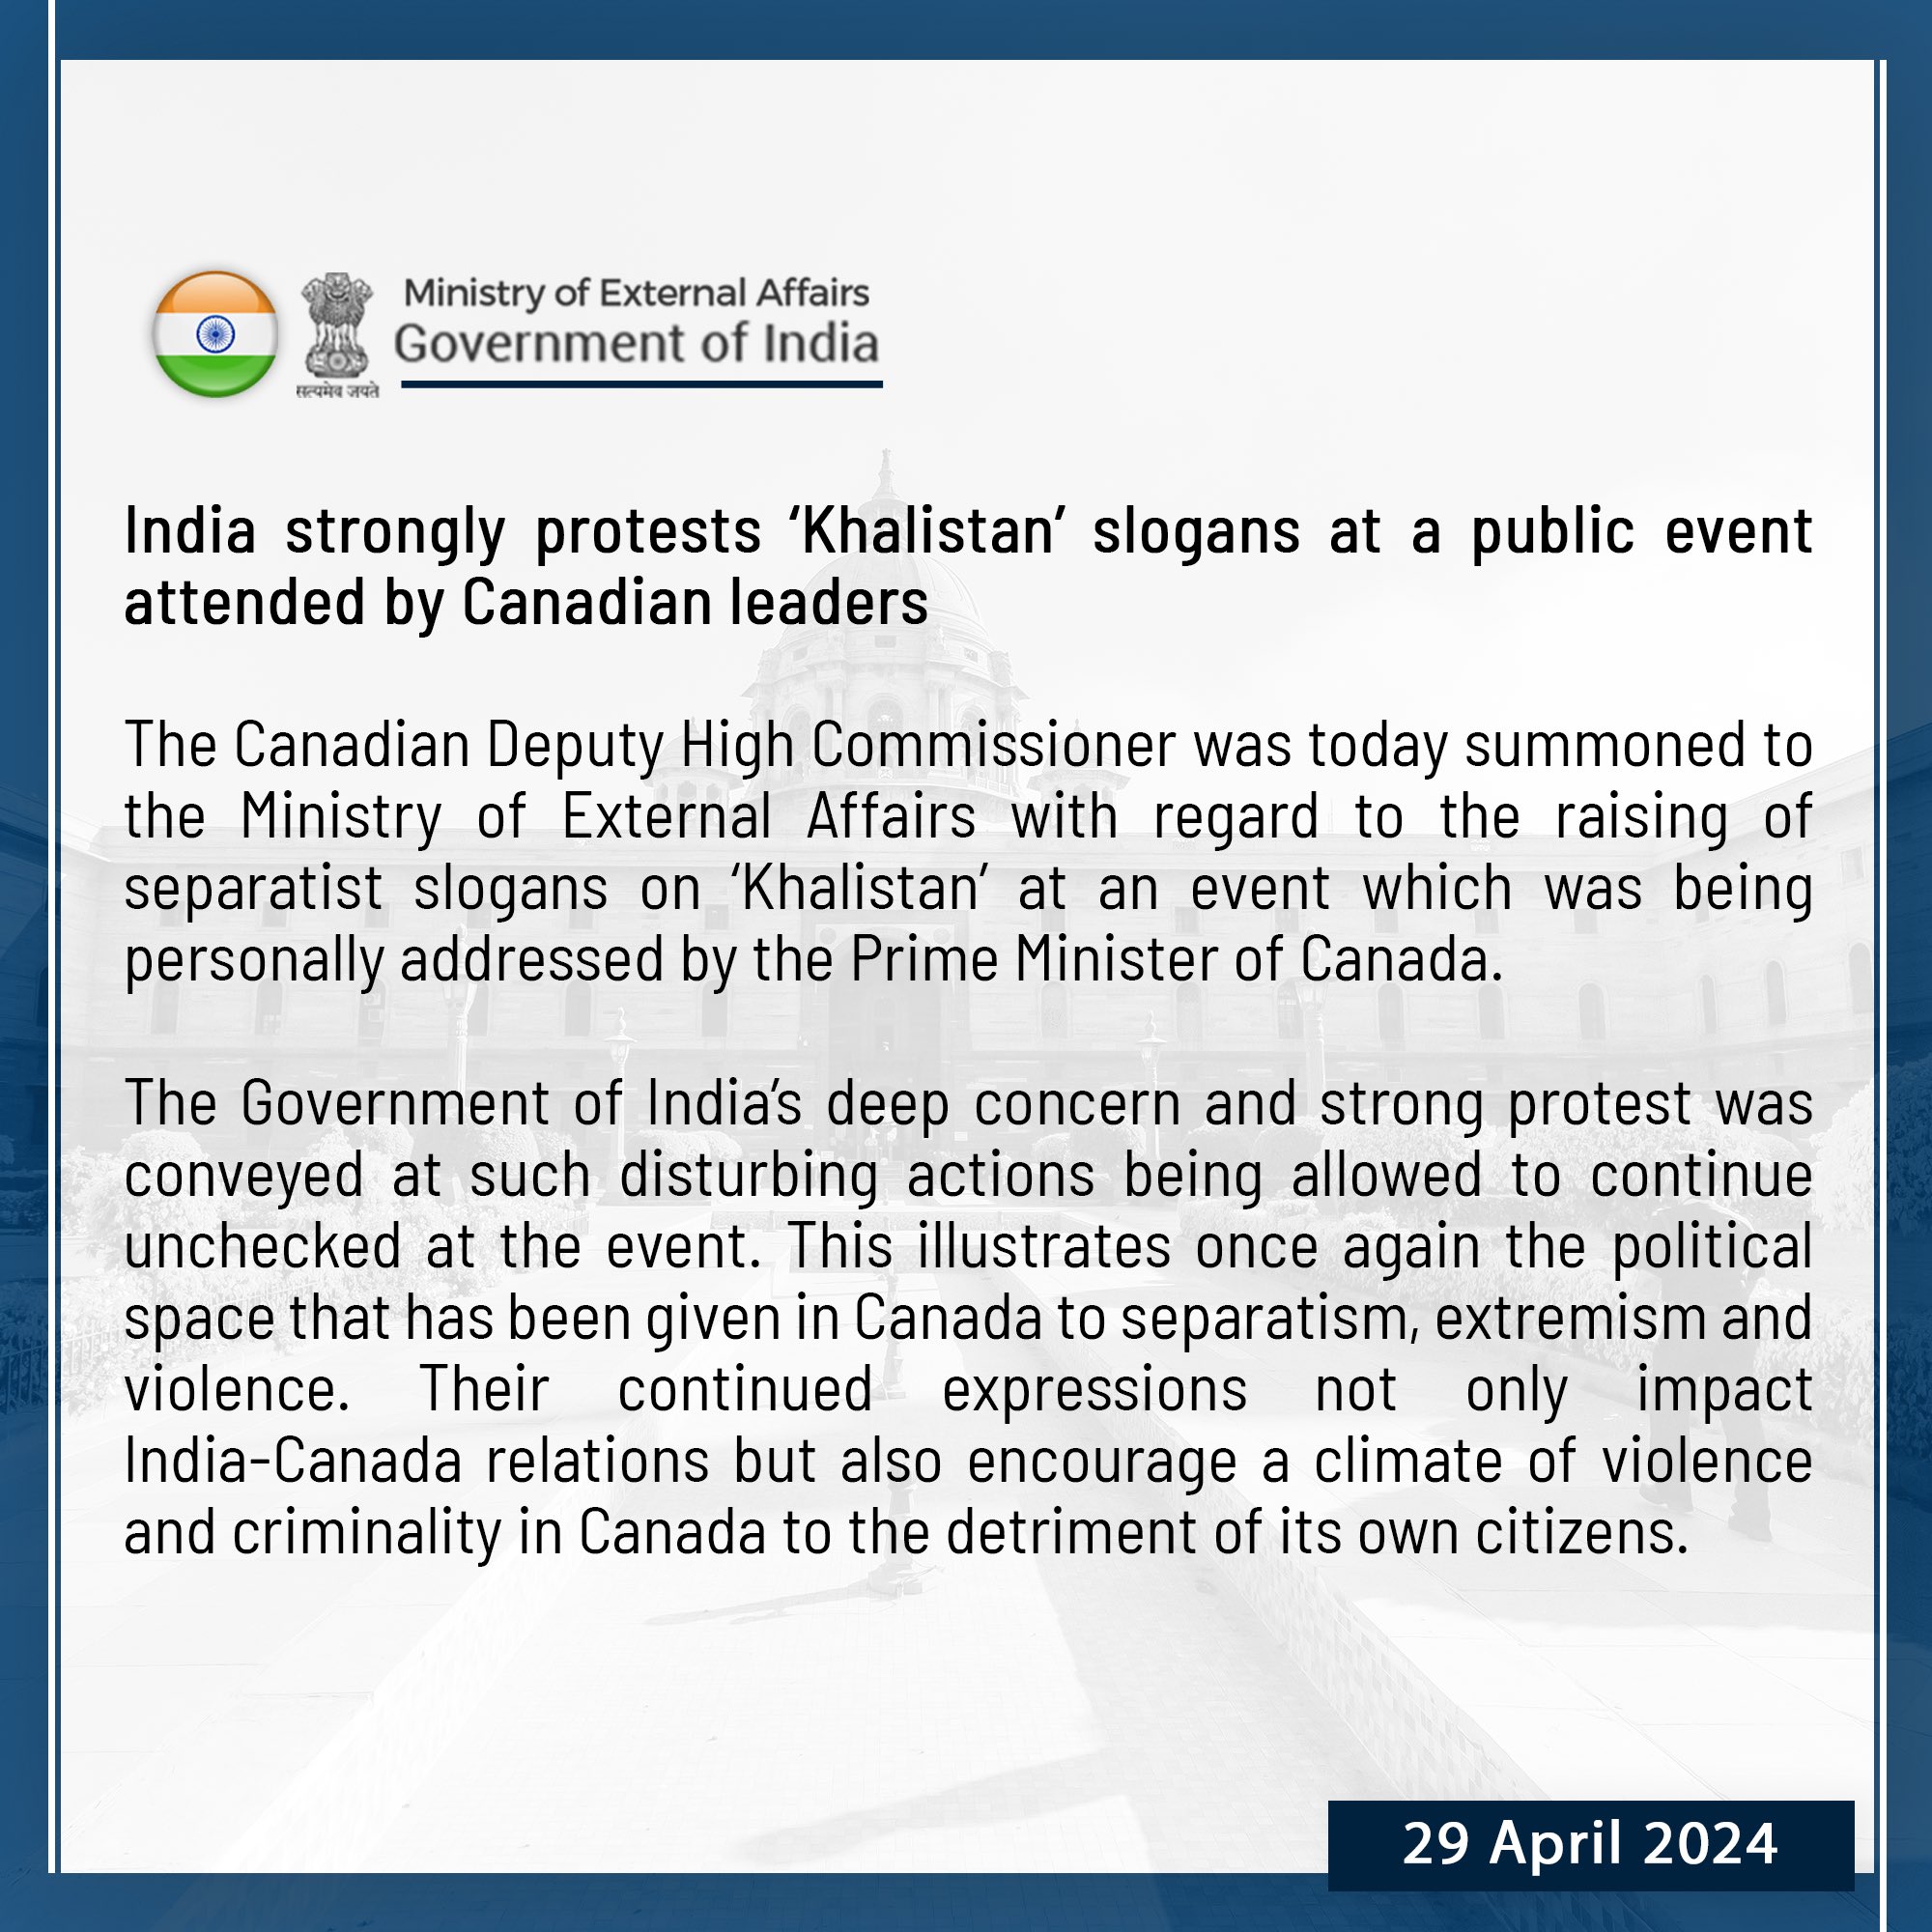 India strongly protests 'Khalistan' slogans at a public event attended by Canadian leaders